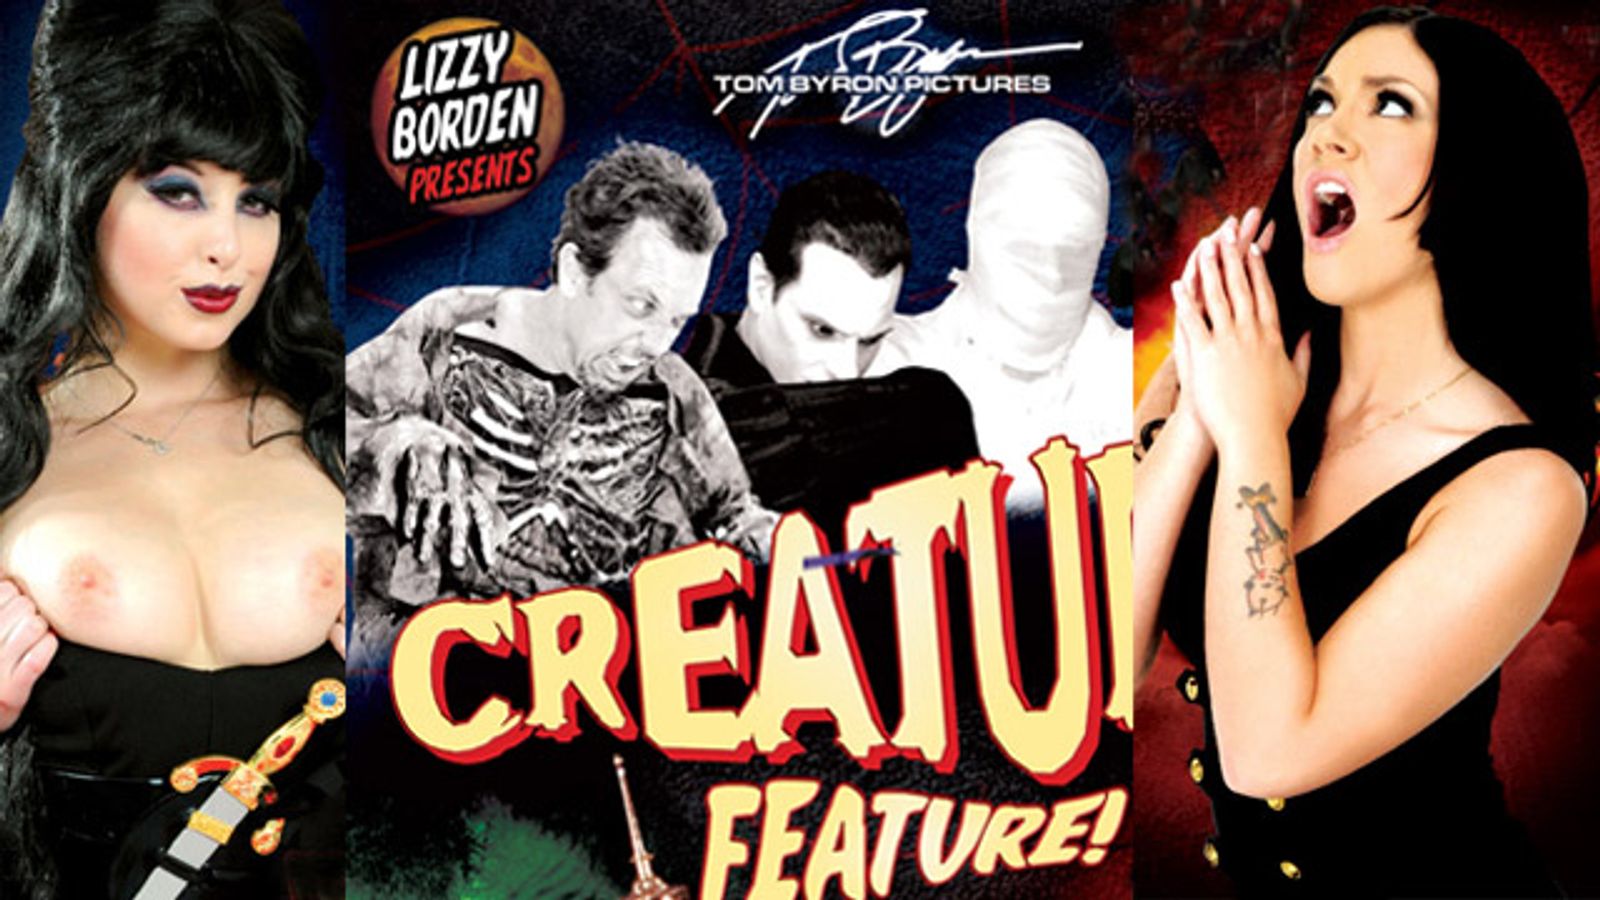 Lizzy Borden Returns to Director’s Chair for ‘Creature Feature’